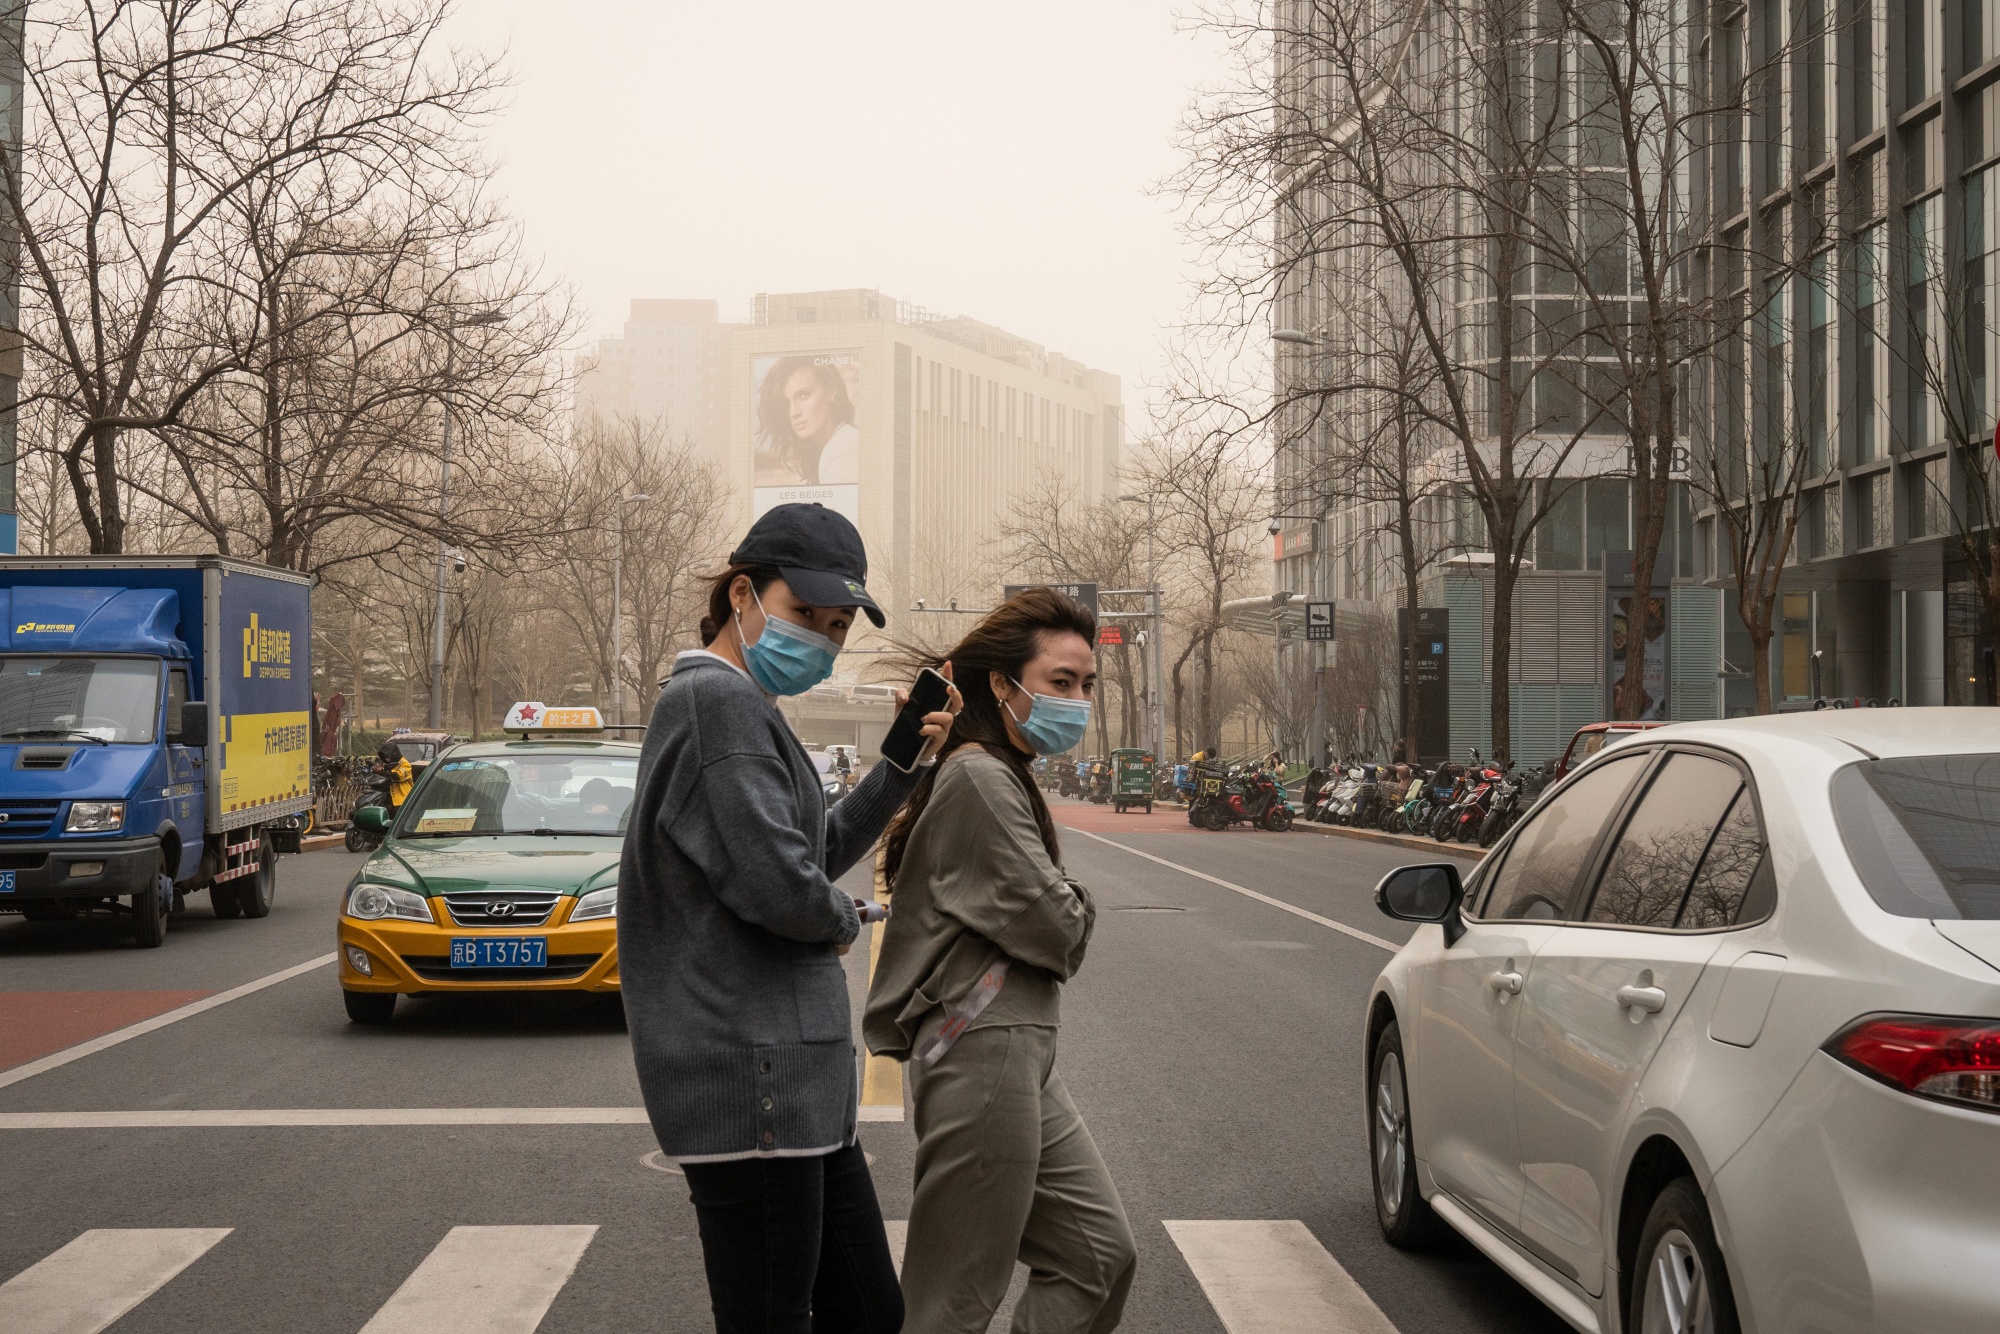 https://www.bloomberg.com/news/articles/2022-03-22/every-country-is-flunking-who-air-quality-standard-report